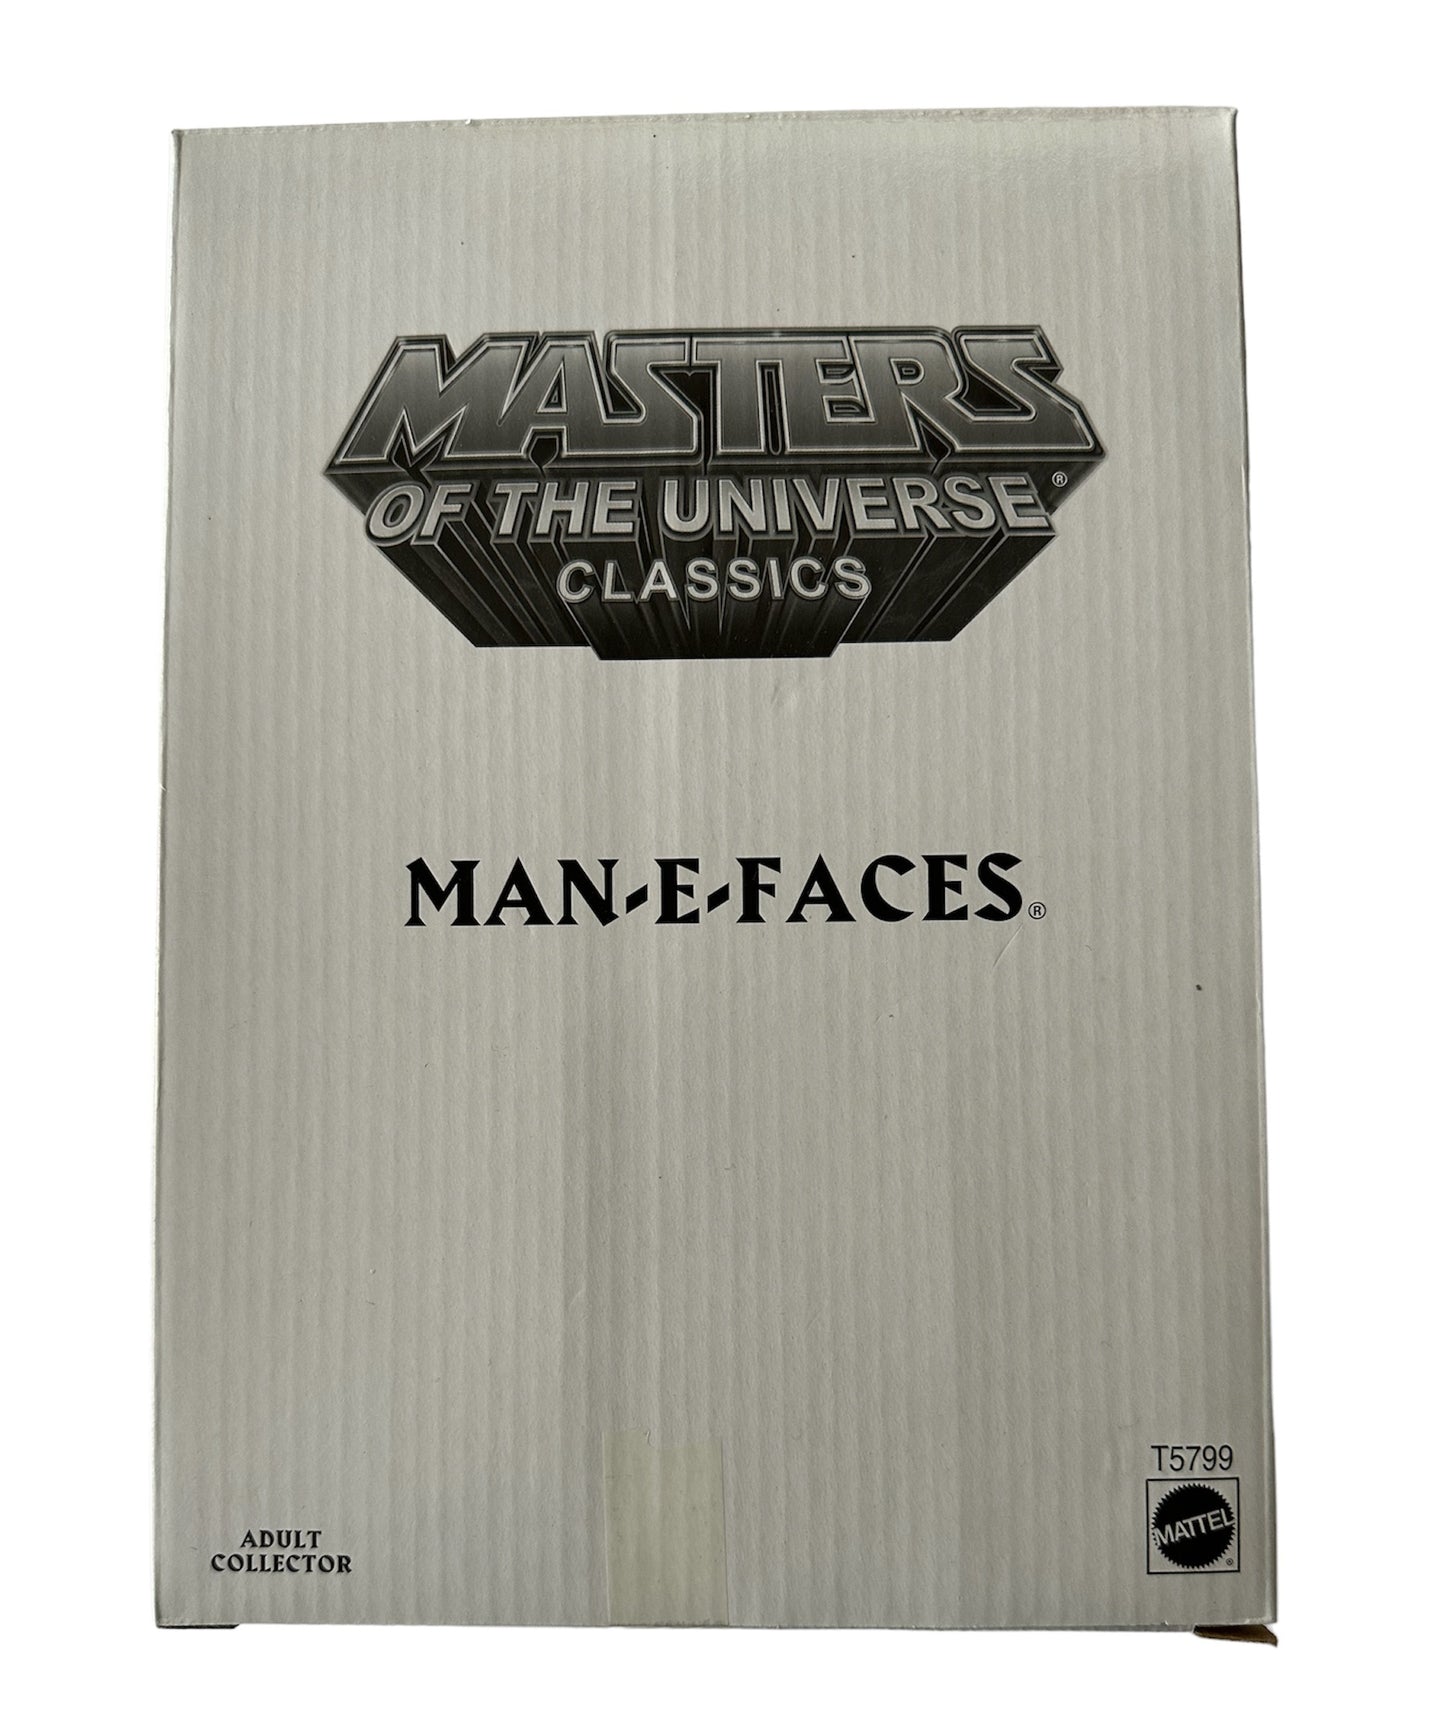 Vintage 2011 Masters MOTU Of The Universe Classics - Man-E-Faces - Human - Robot - Monster Action Figure - Brand New Factory Sealed Shop Stock Room Find